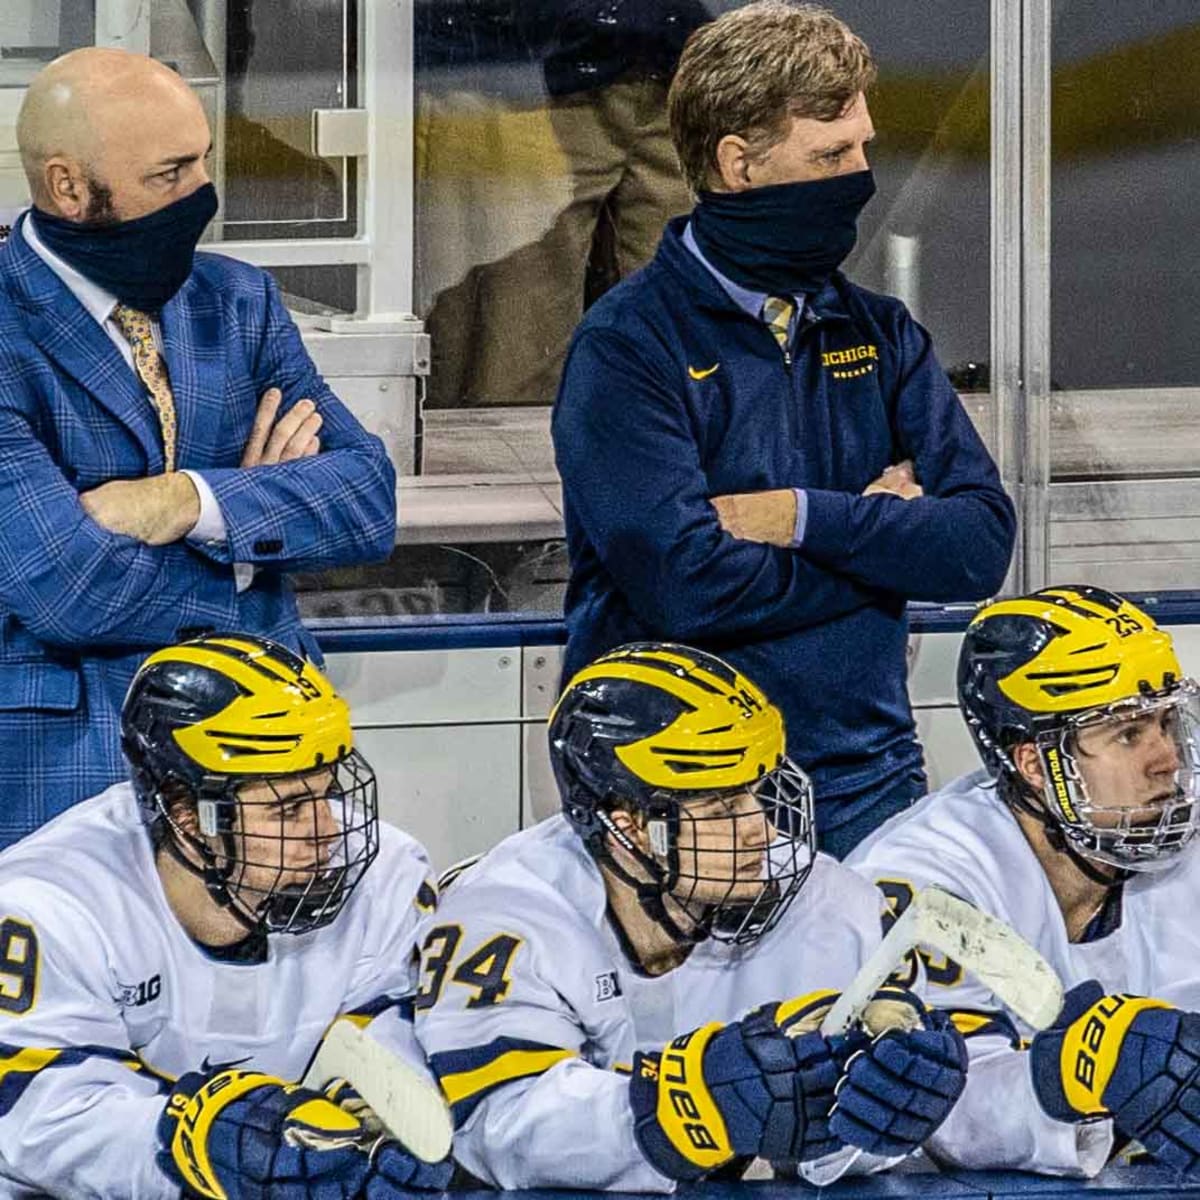 Michigan ice hockey coach Mel Pearson ousted following